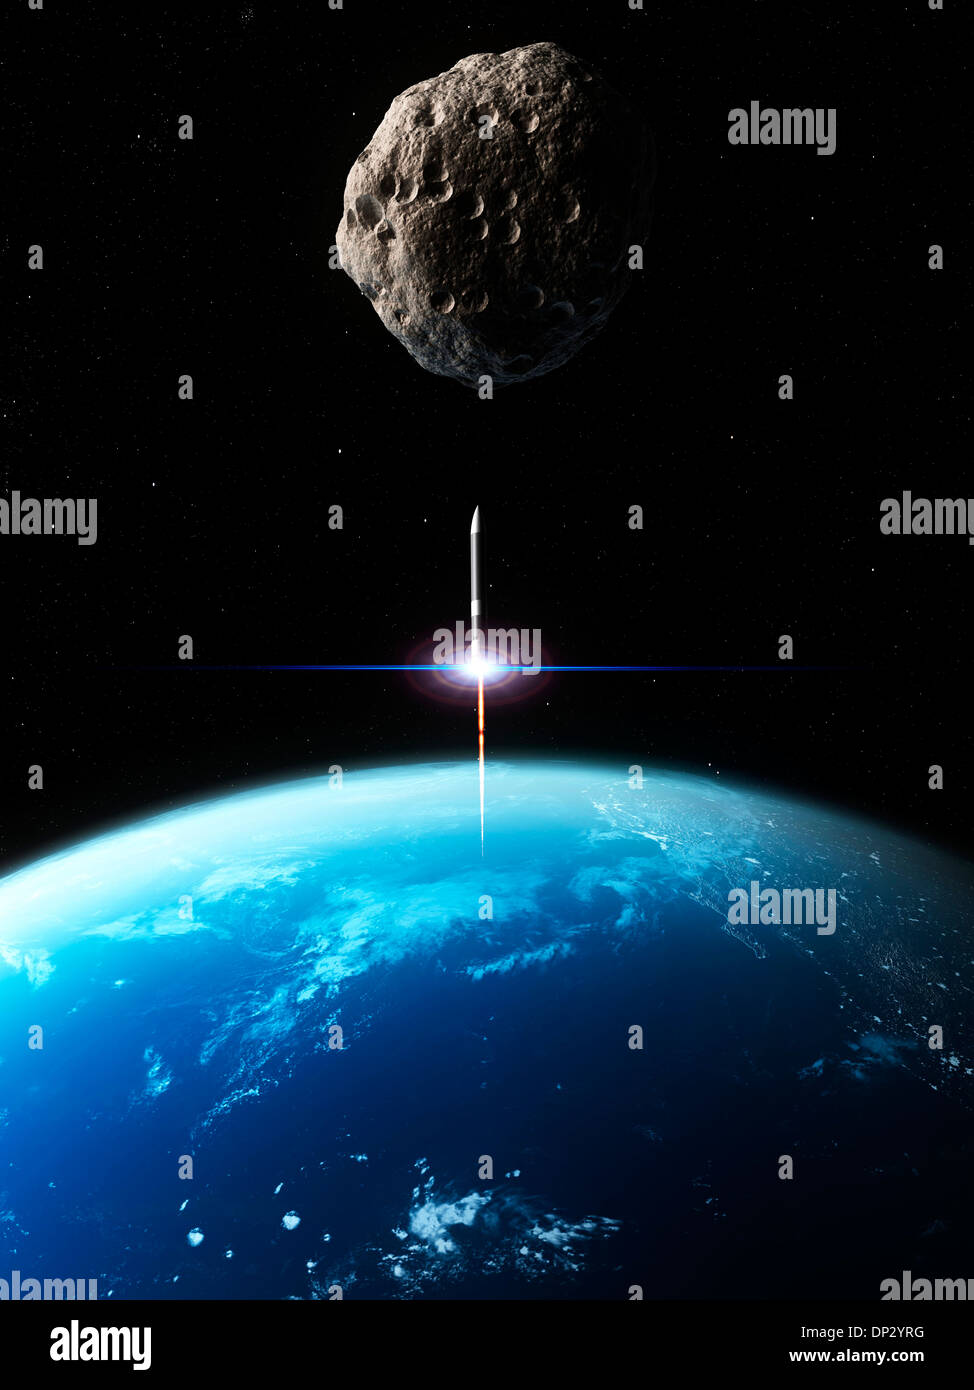 Asteroid defence missile, artwork Stock Photo